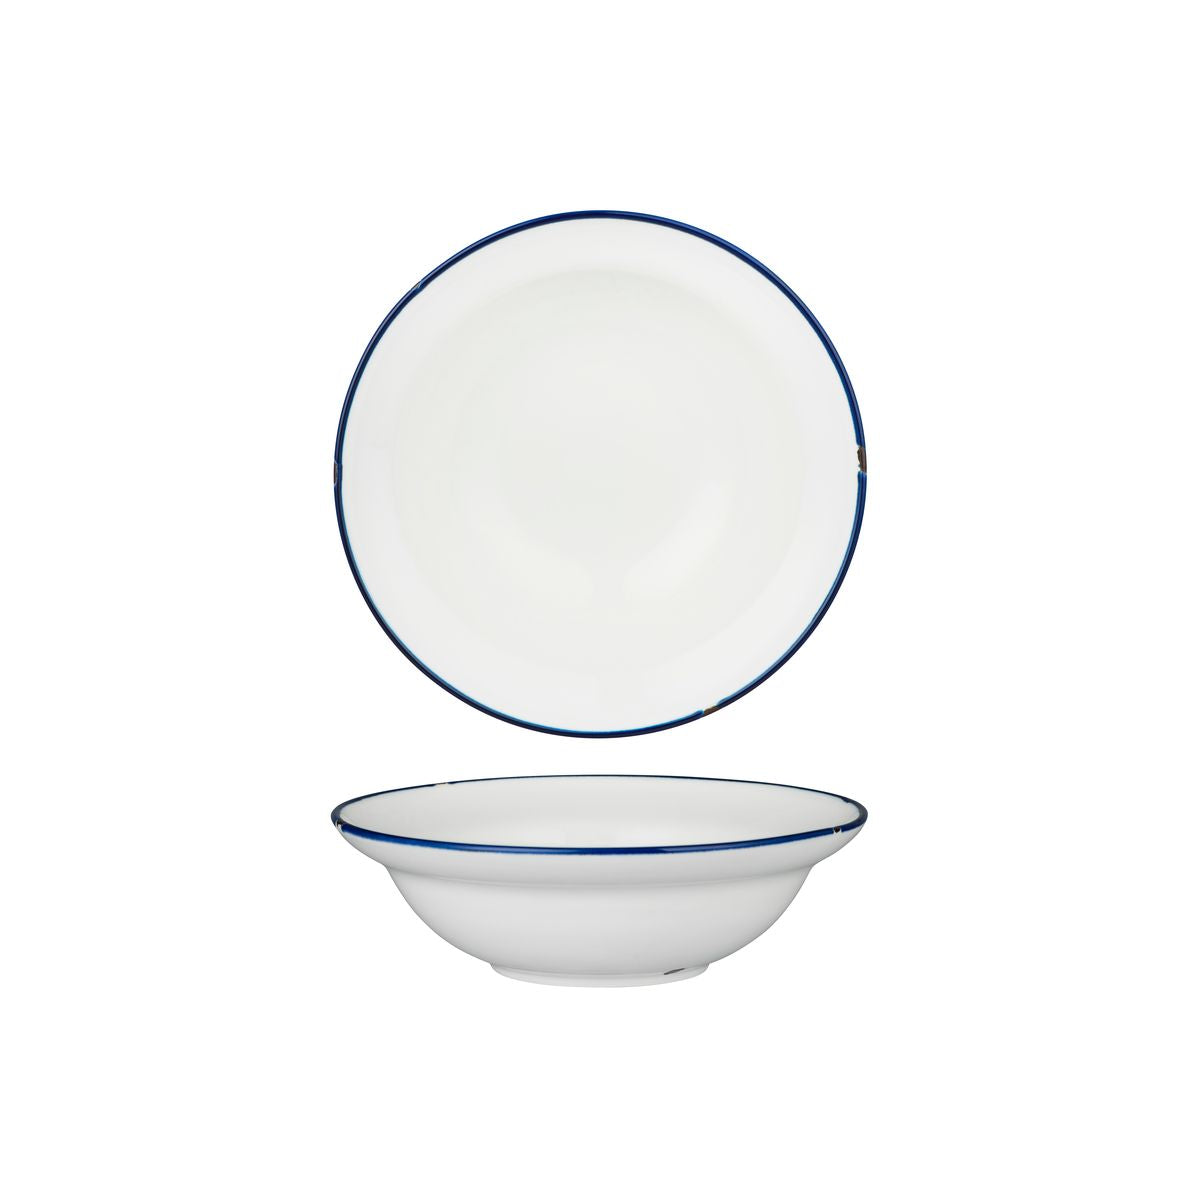 Round Bowl - 190mm, Tintin White & Navy from Luzerne. made out of Ceramic and sold in boxes of 12. Hospitality quality at wholesale price with The Flying Fork! 